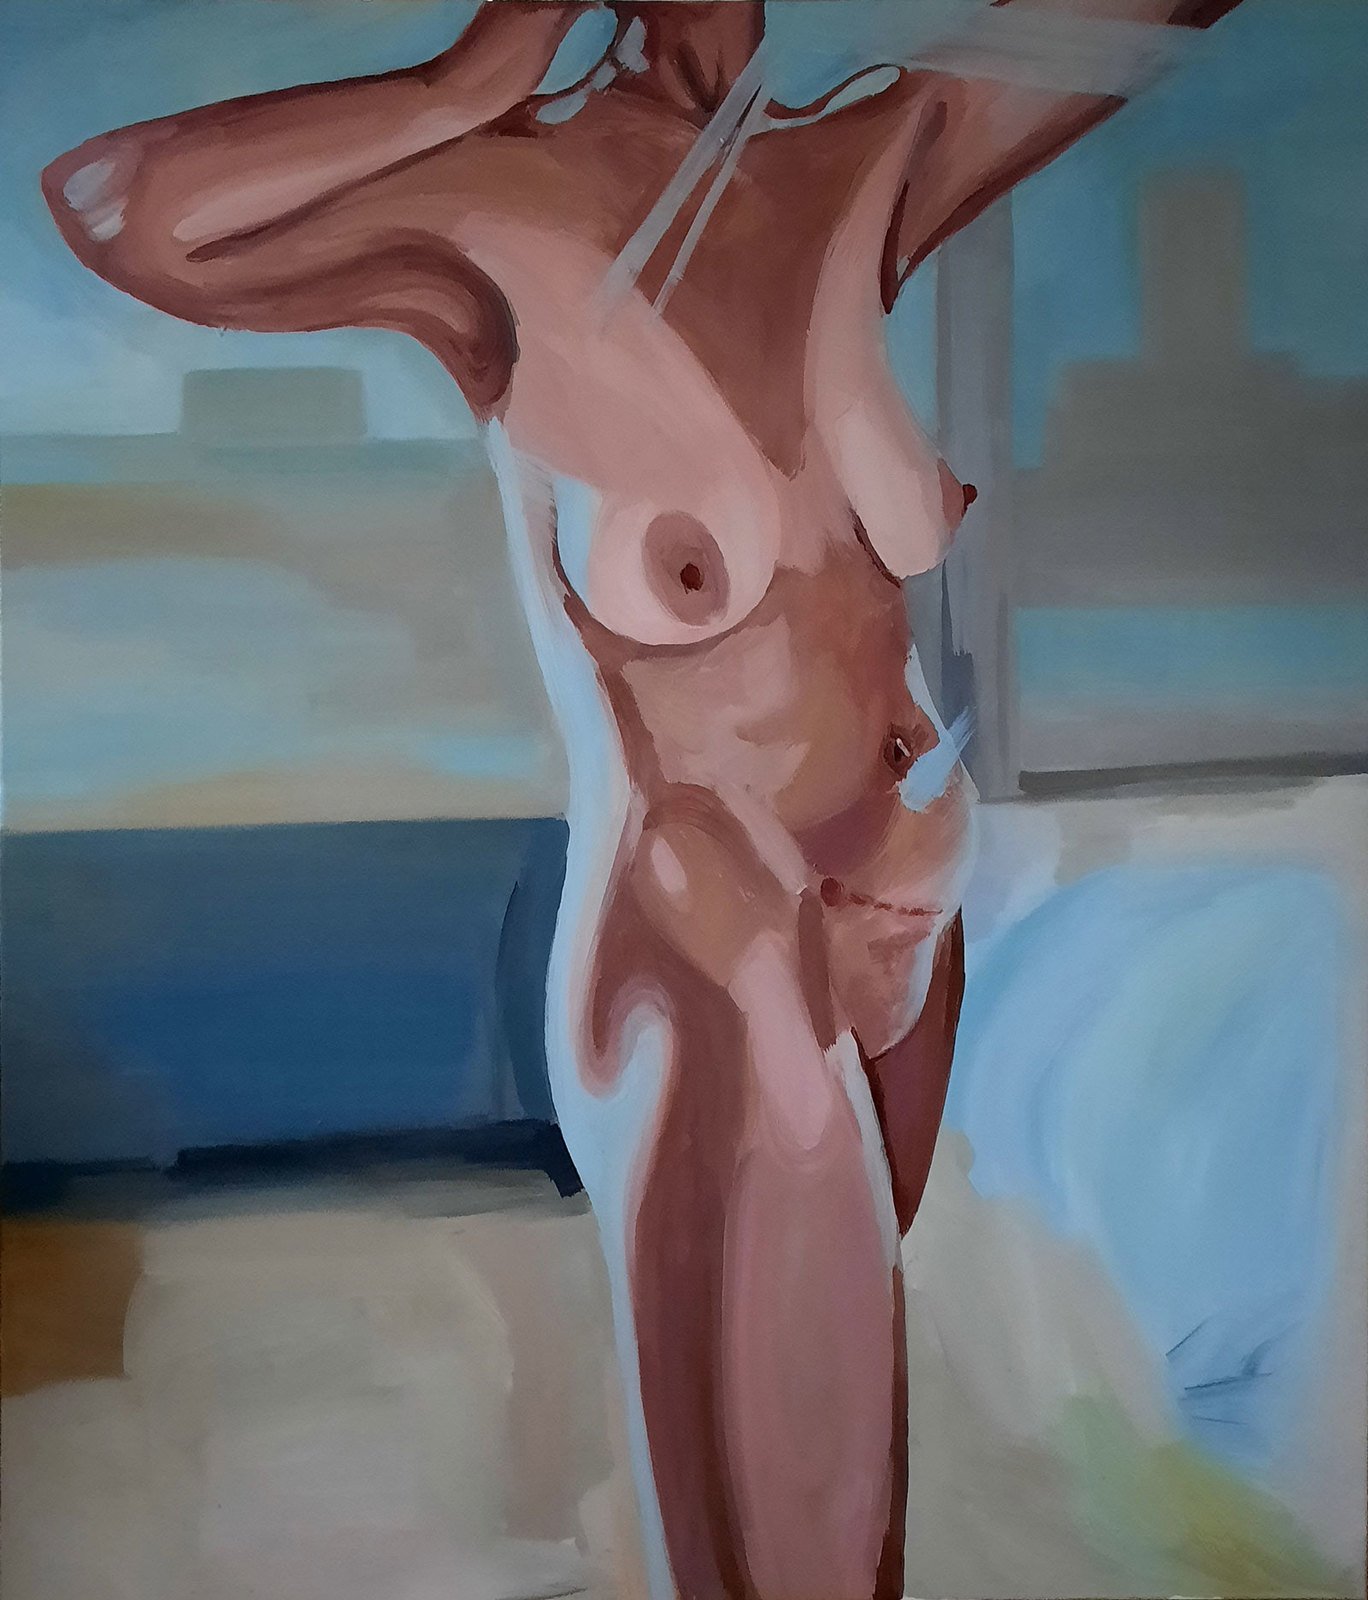 Jana SmetaninaTrace. From the project Imperfections, 2019&ndash;2021Oil on canvasCourtesy of the artist